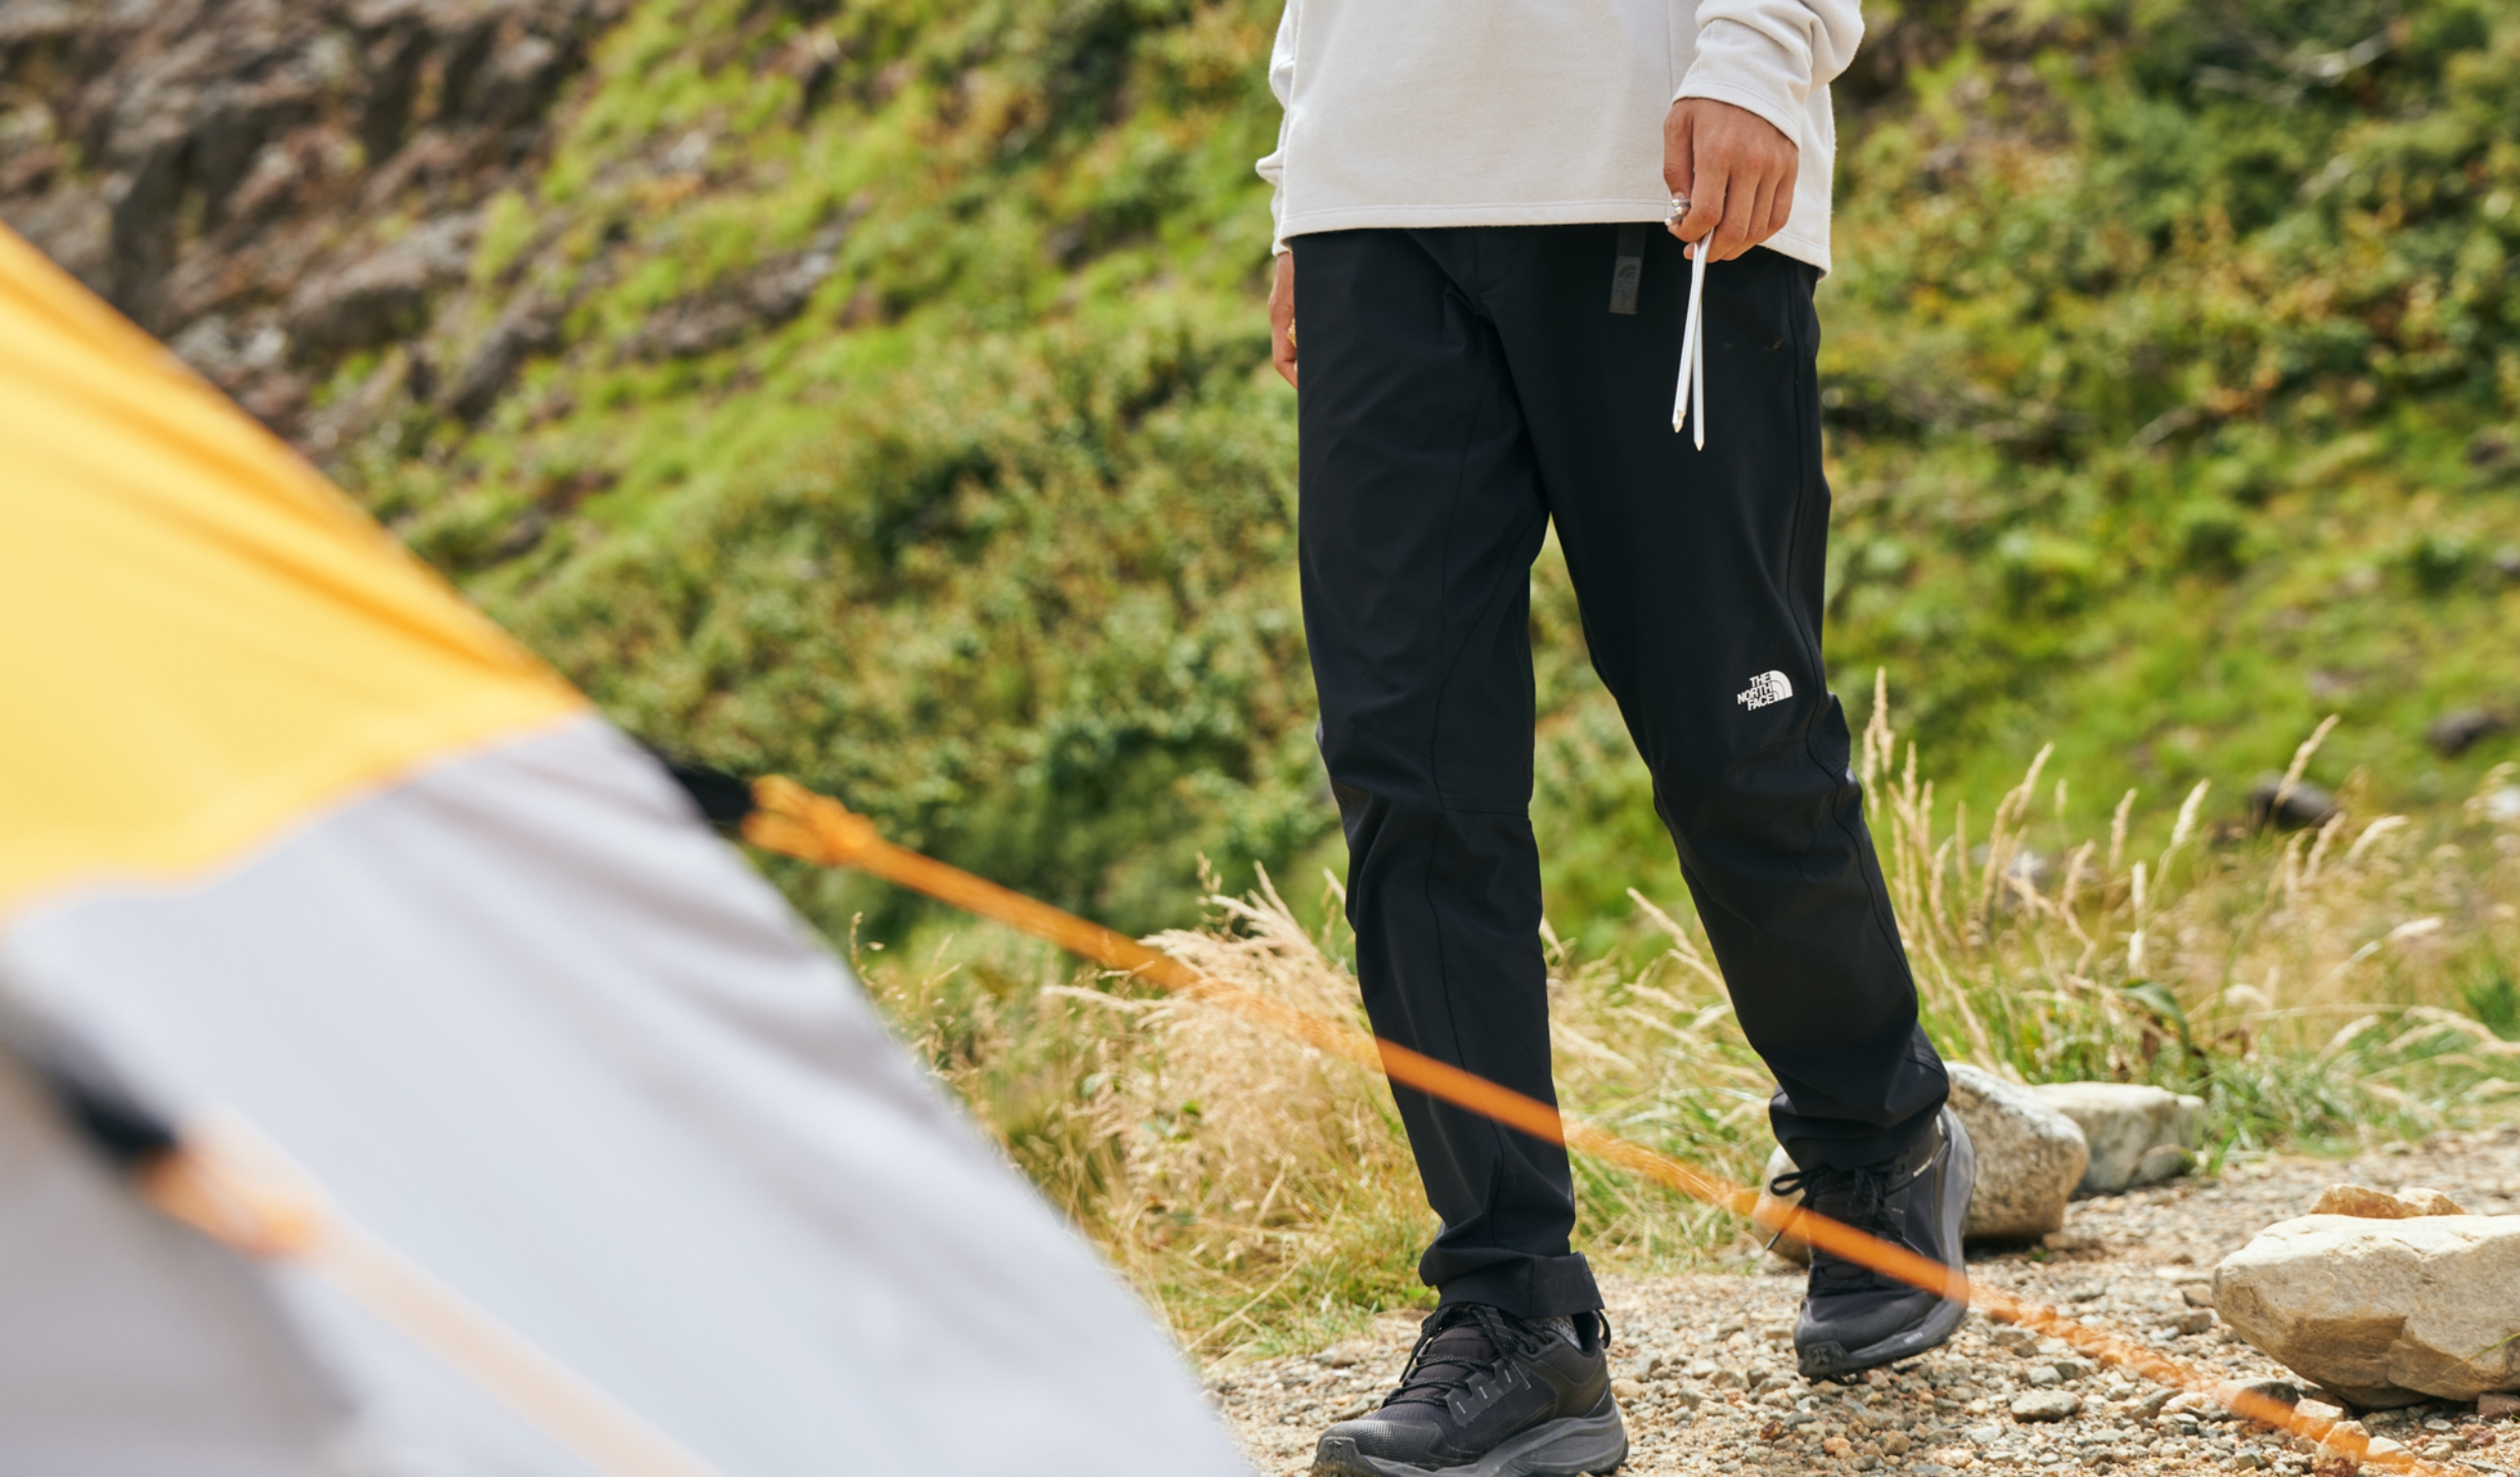 Verb Light Pant | Online Camp Store | THE NORTH FACE CAMP